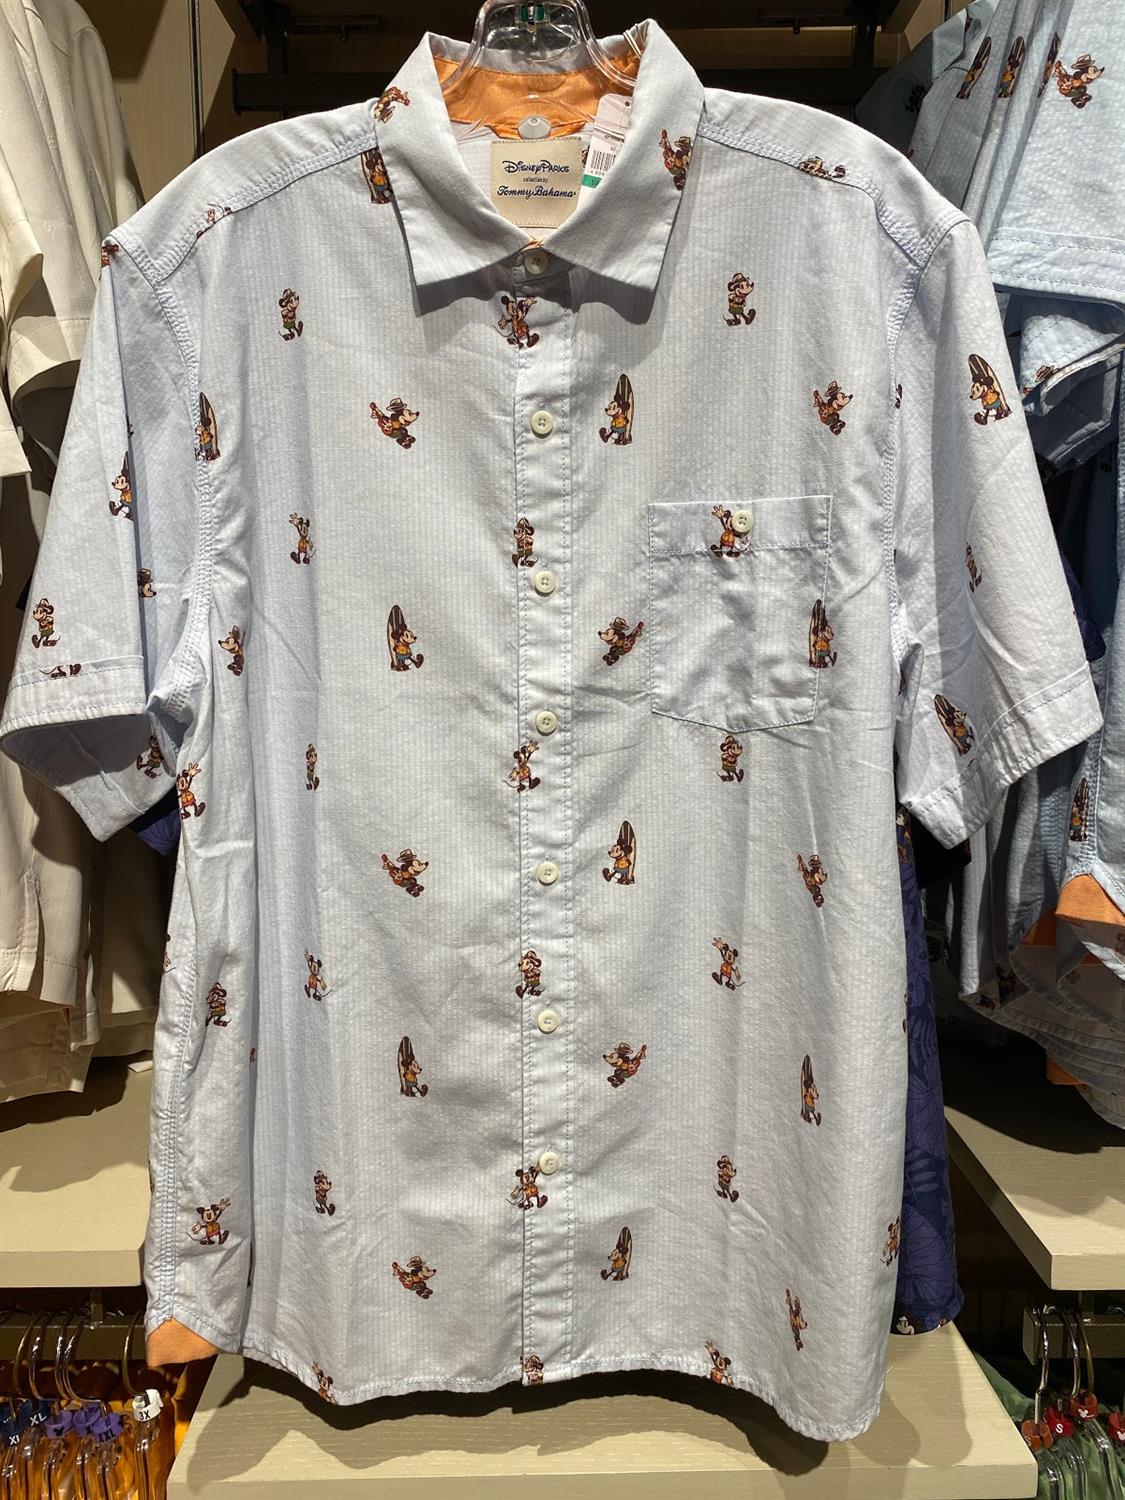 Photos New Disney Tommy Bahama Collection Comes to Walt